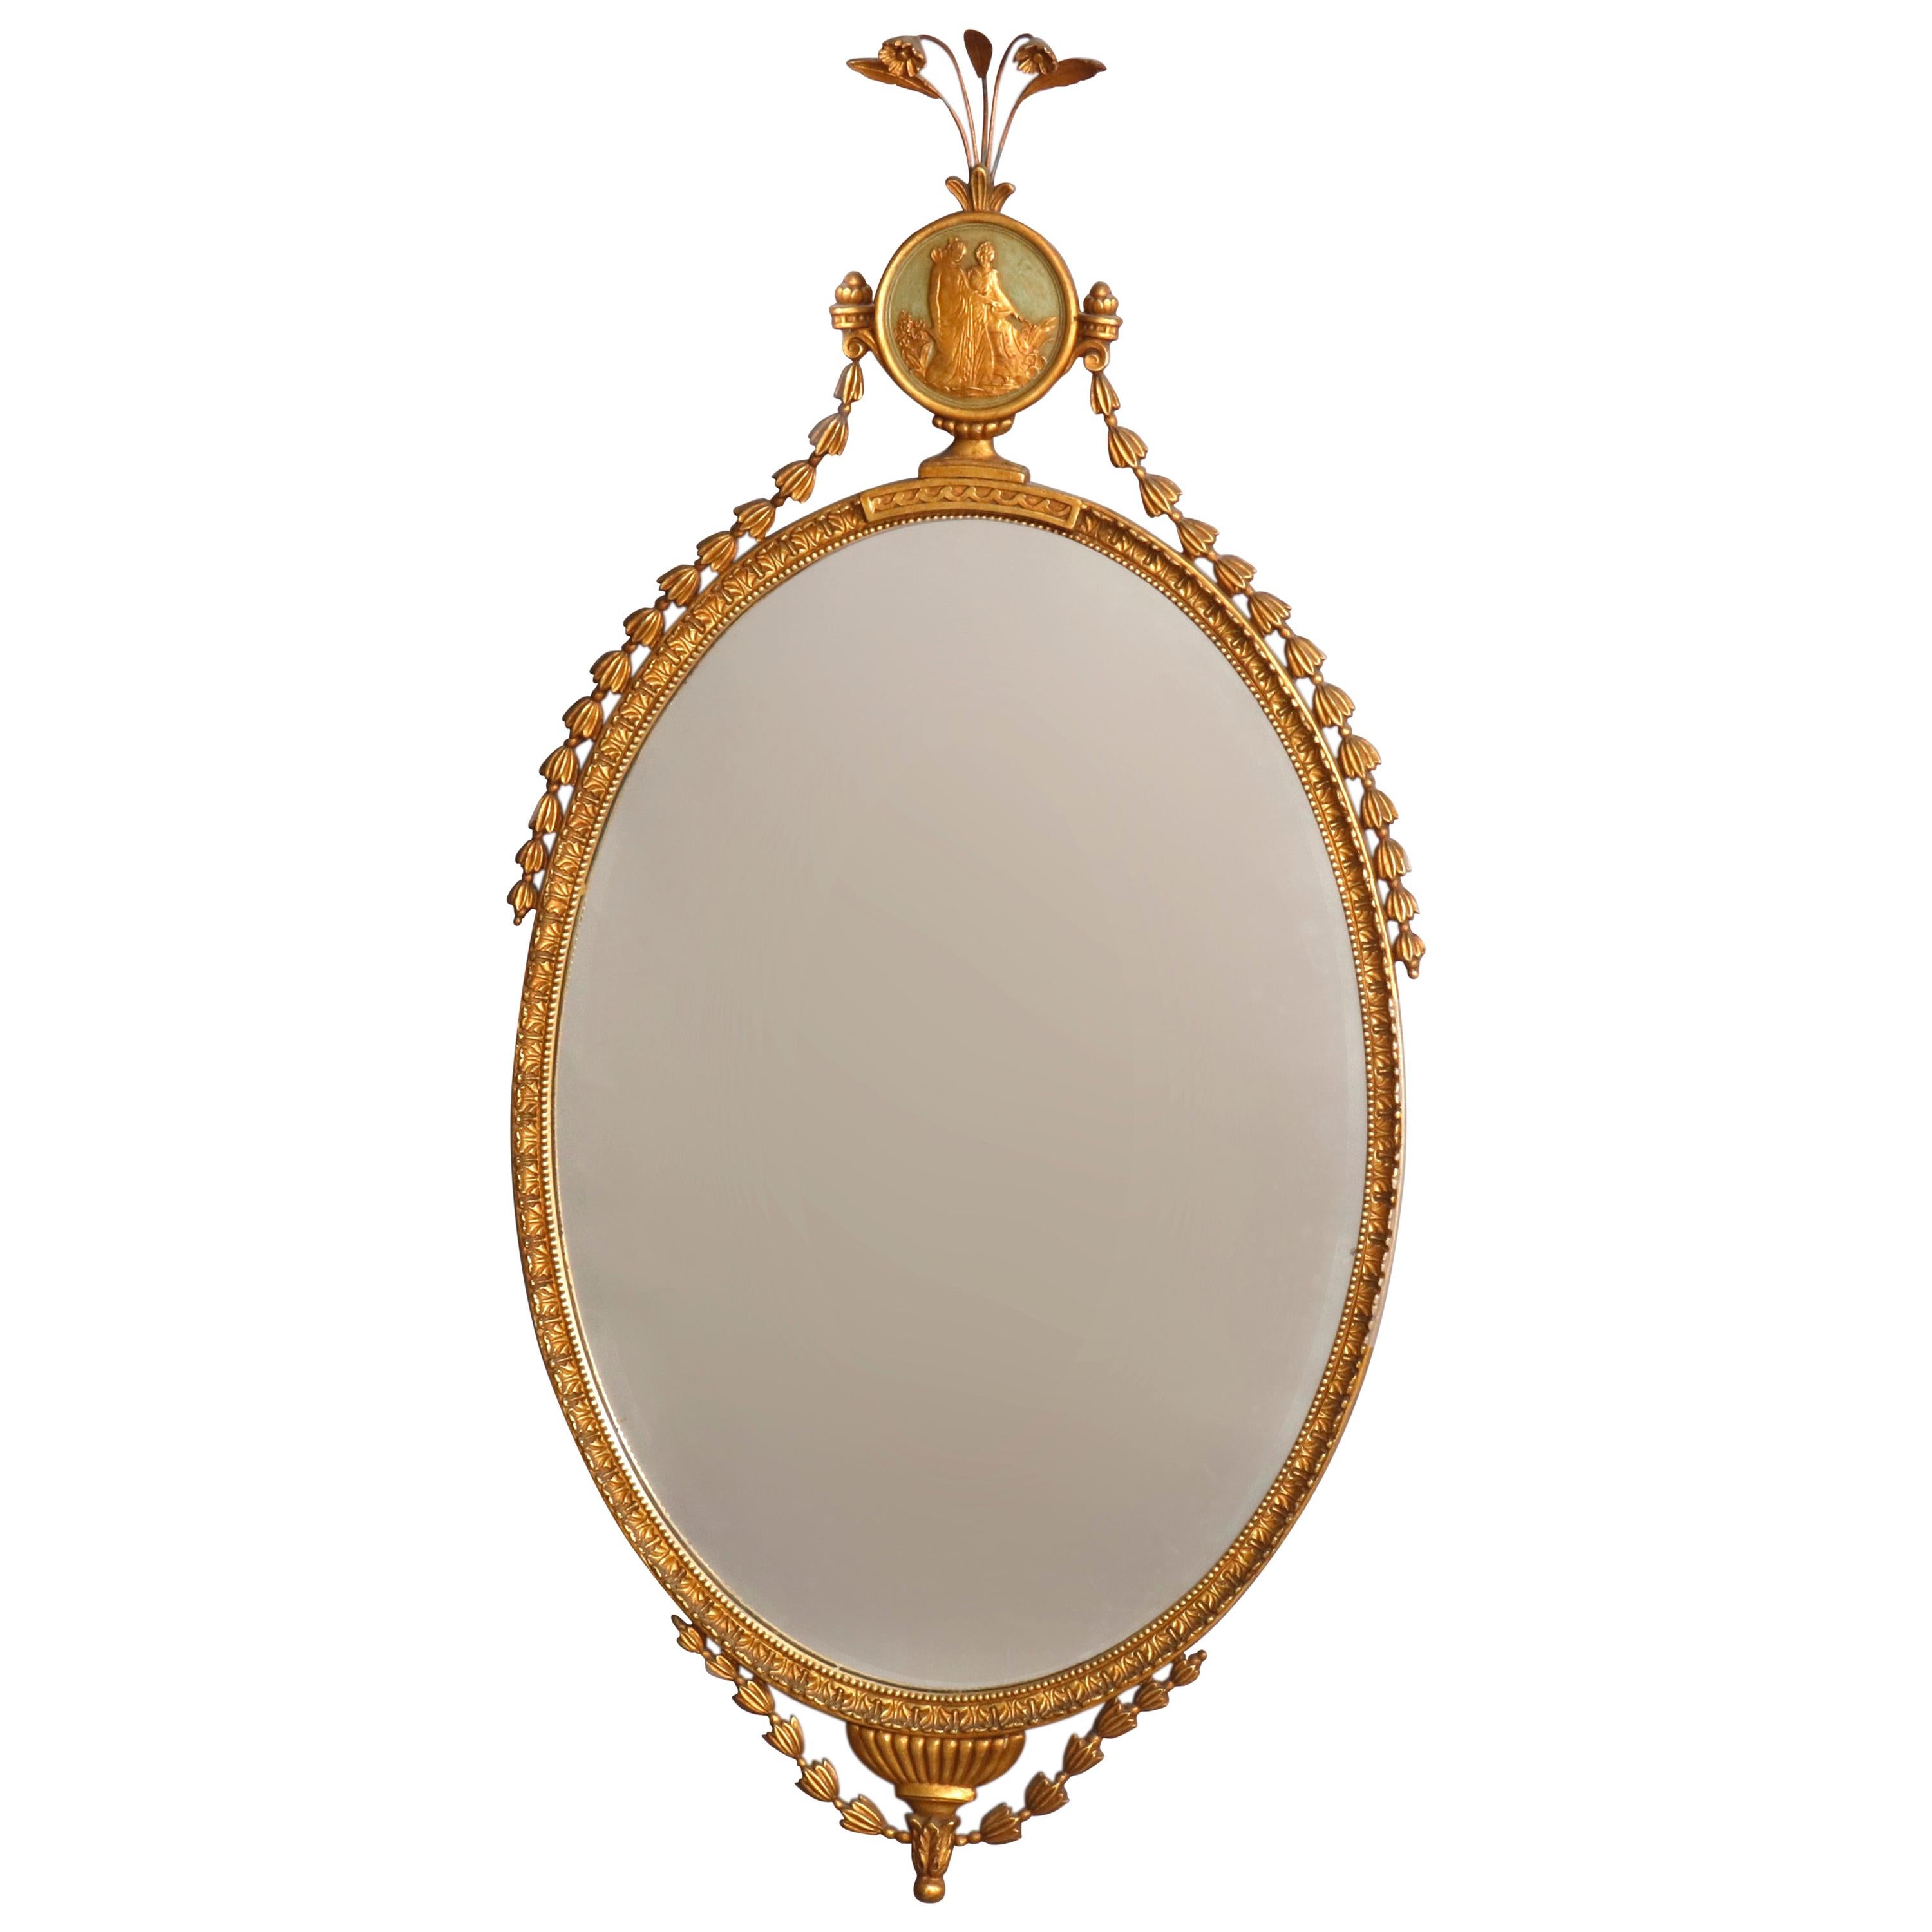 Antique Adam Style Polychromed Giltwood Wall Mirror with Figural Medallion